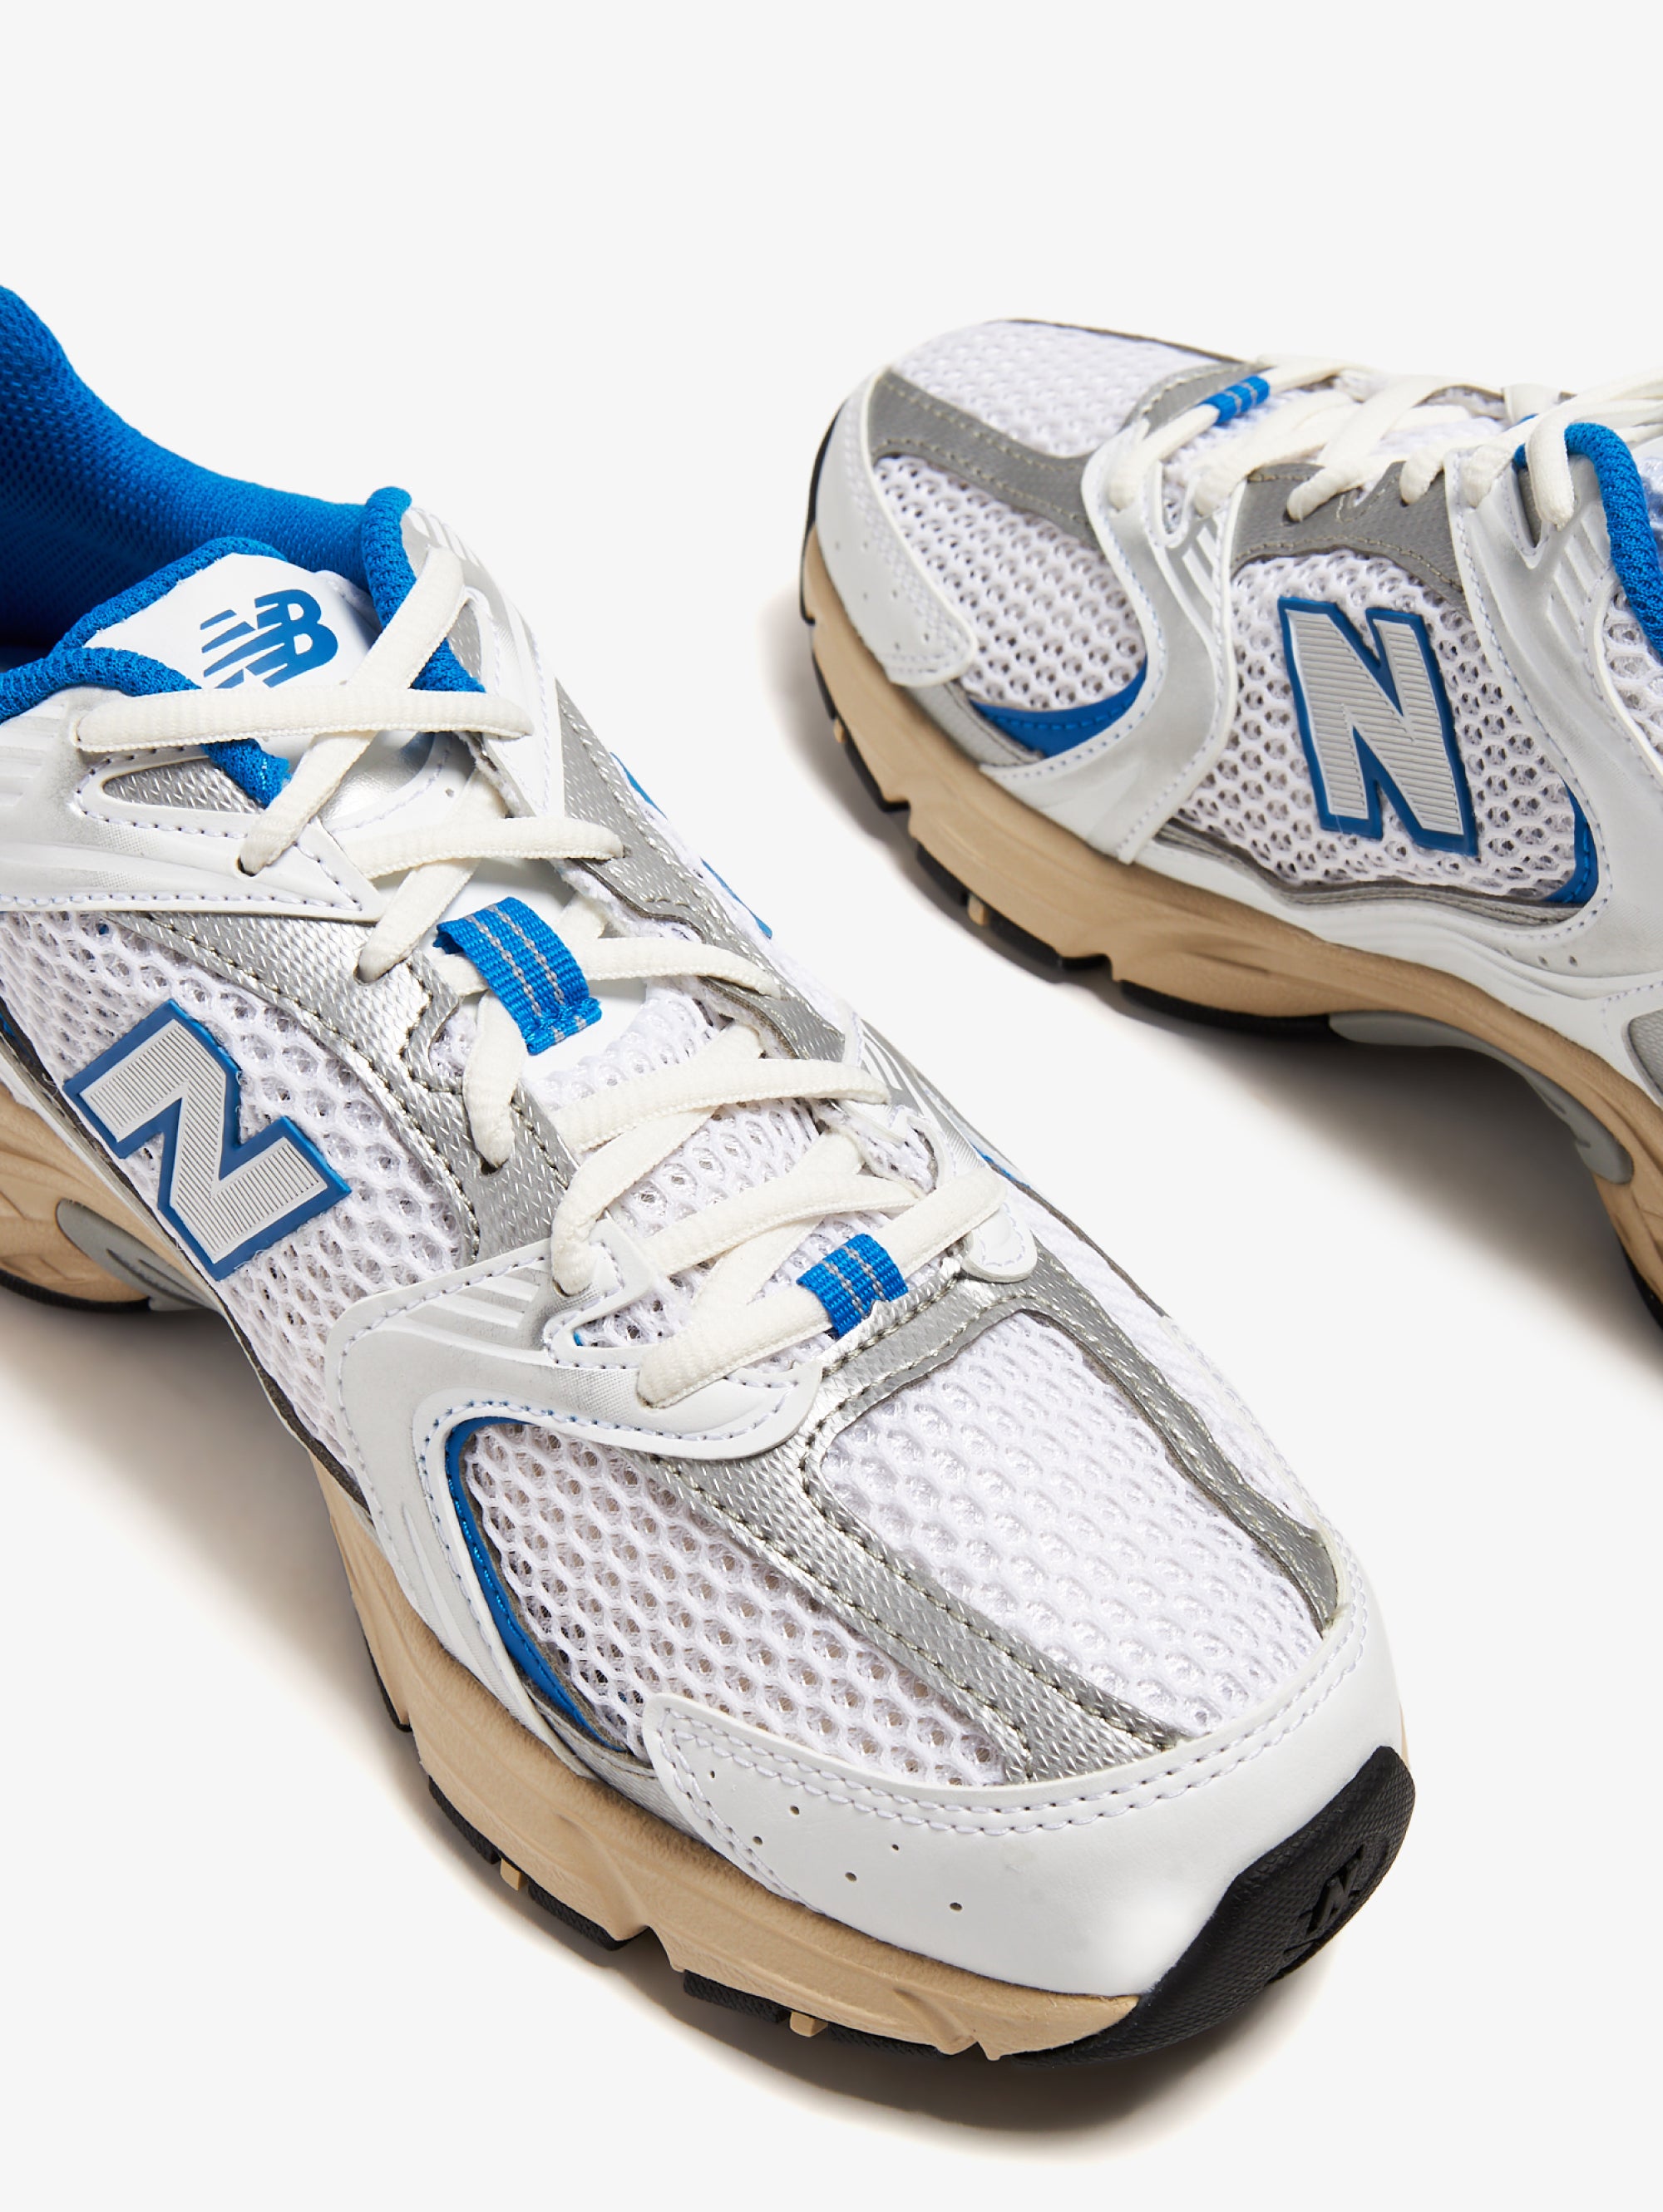 NEW BALANCE - 530 Women's Sneakers Lifestyle Reflection White/Blue